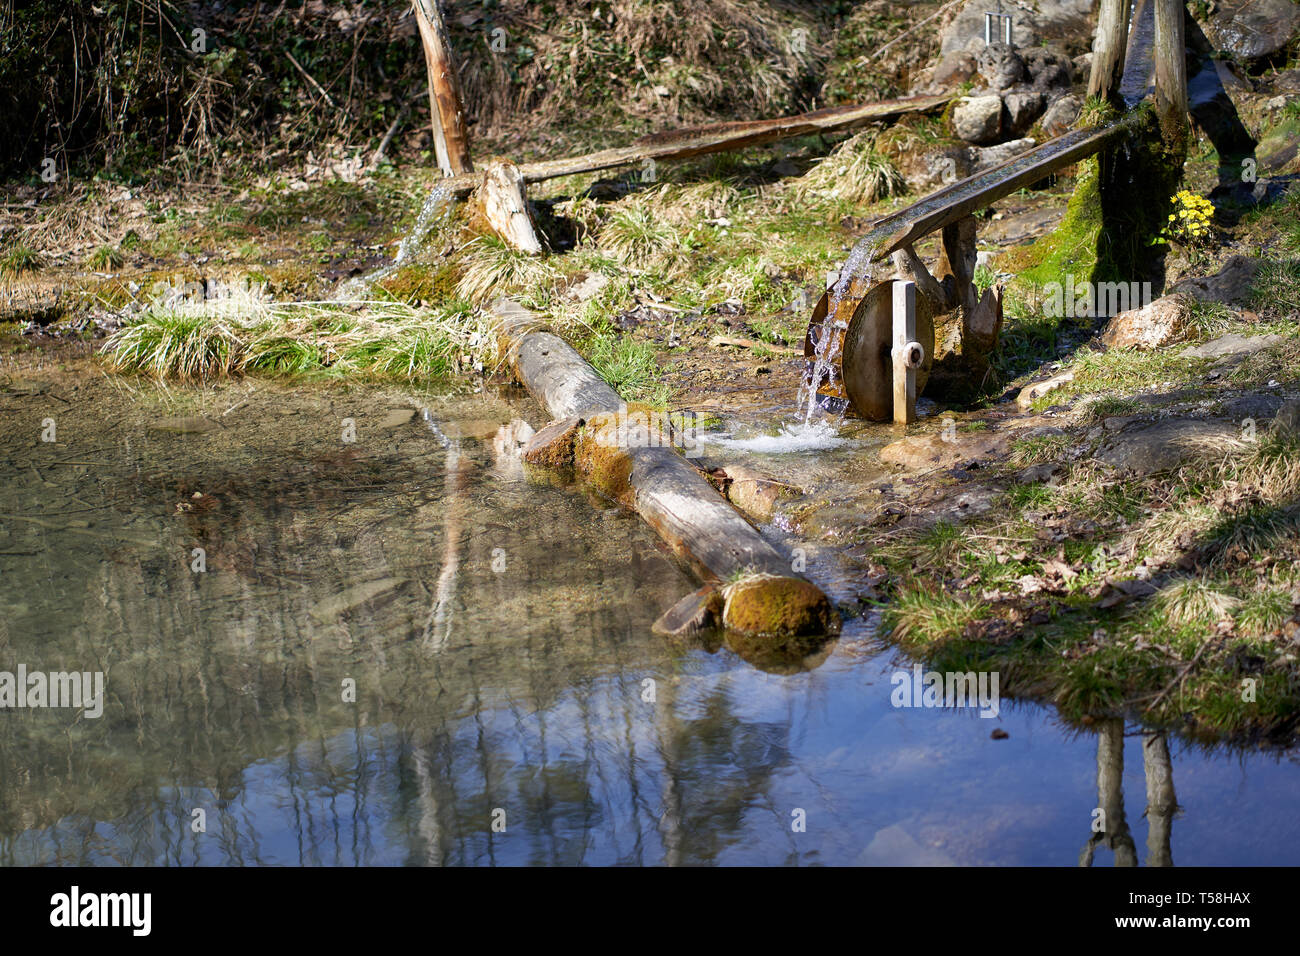 Small water whell with a pond in the forest Stock Photo